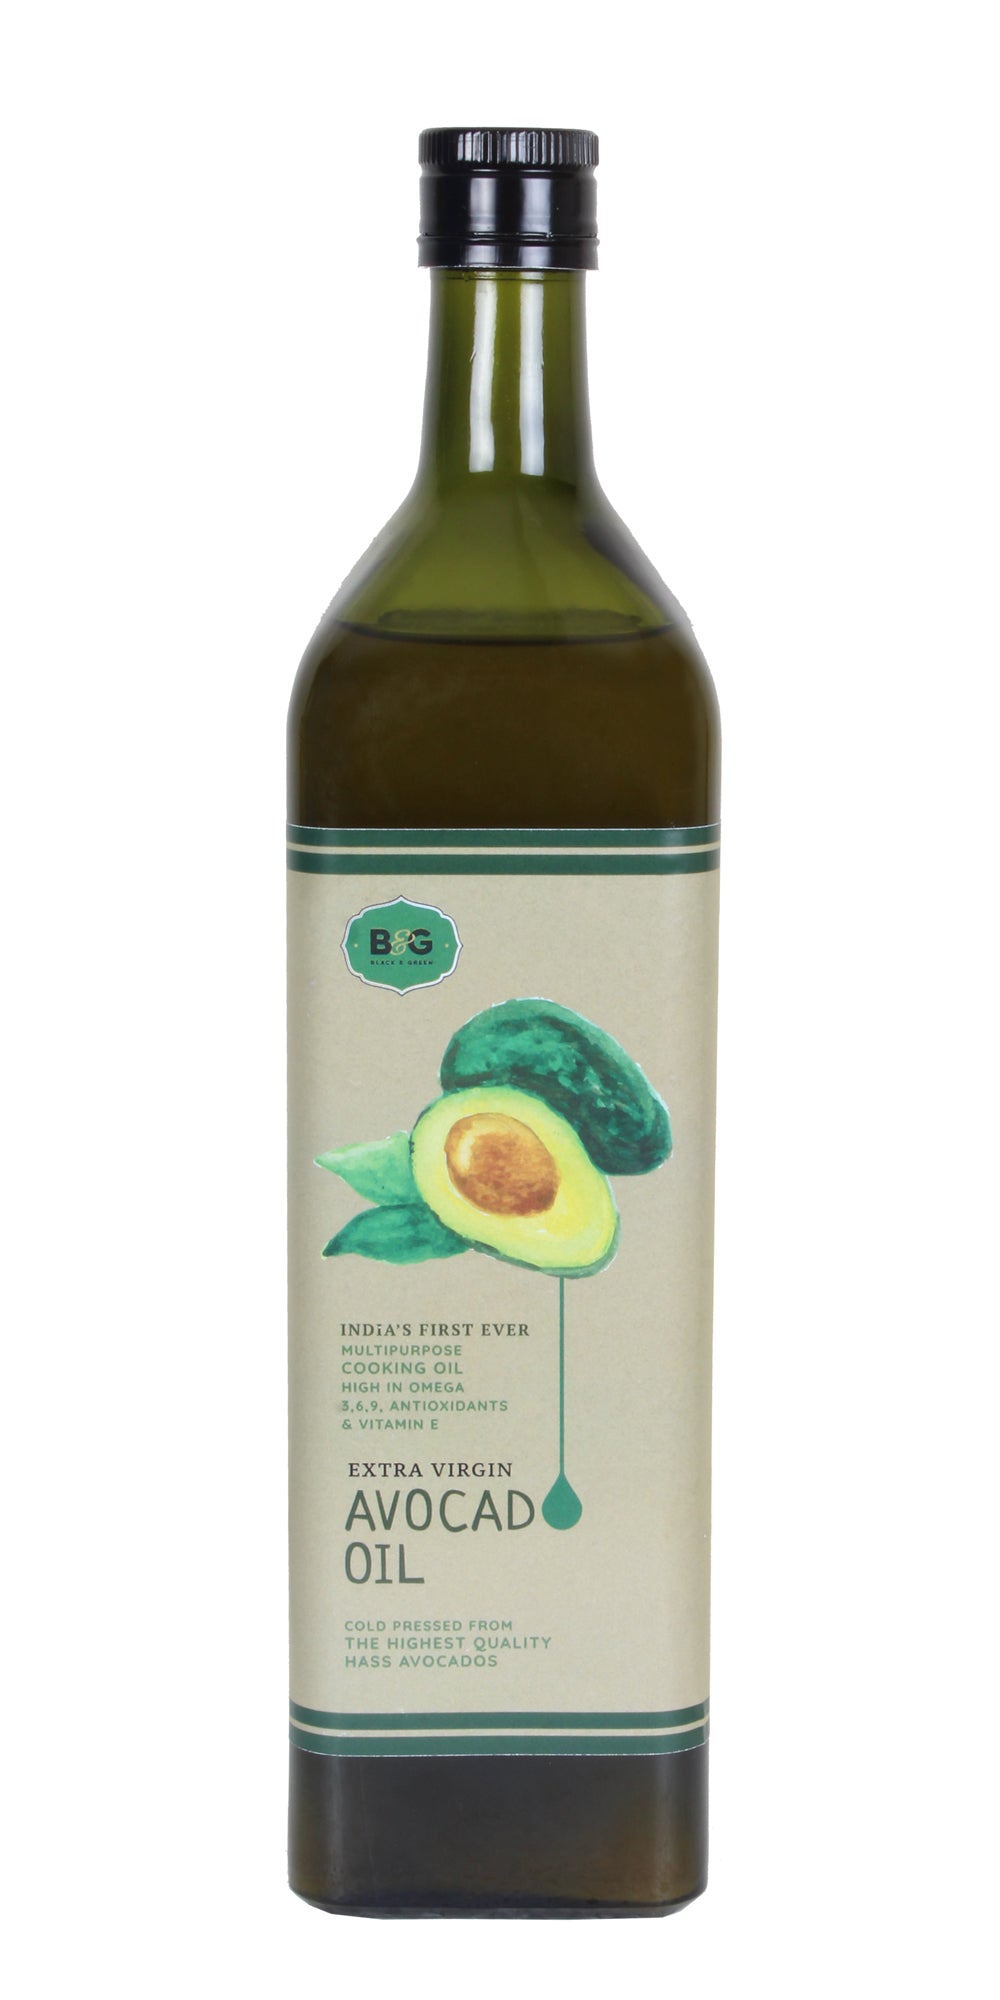 Fantastic Avocado Cooking Oil for all temperatures